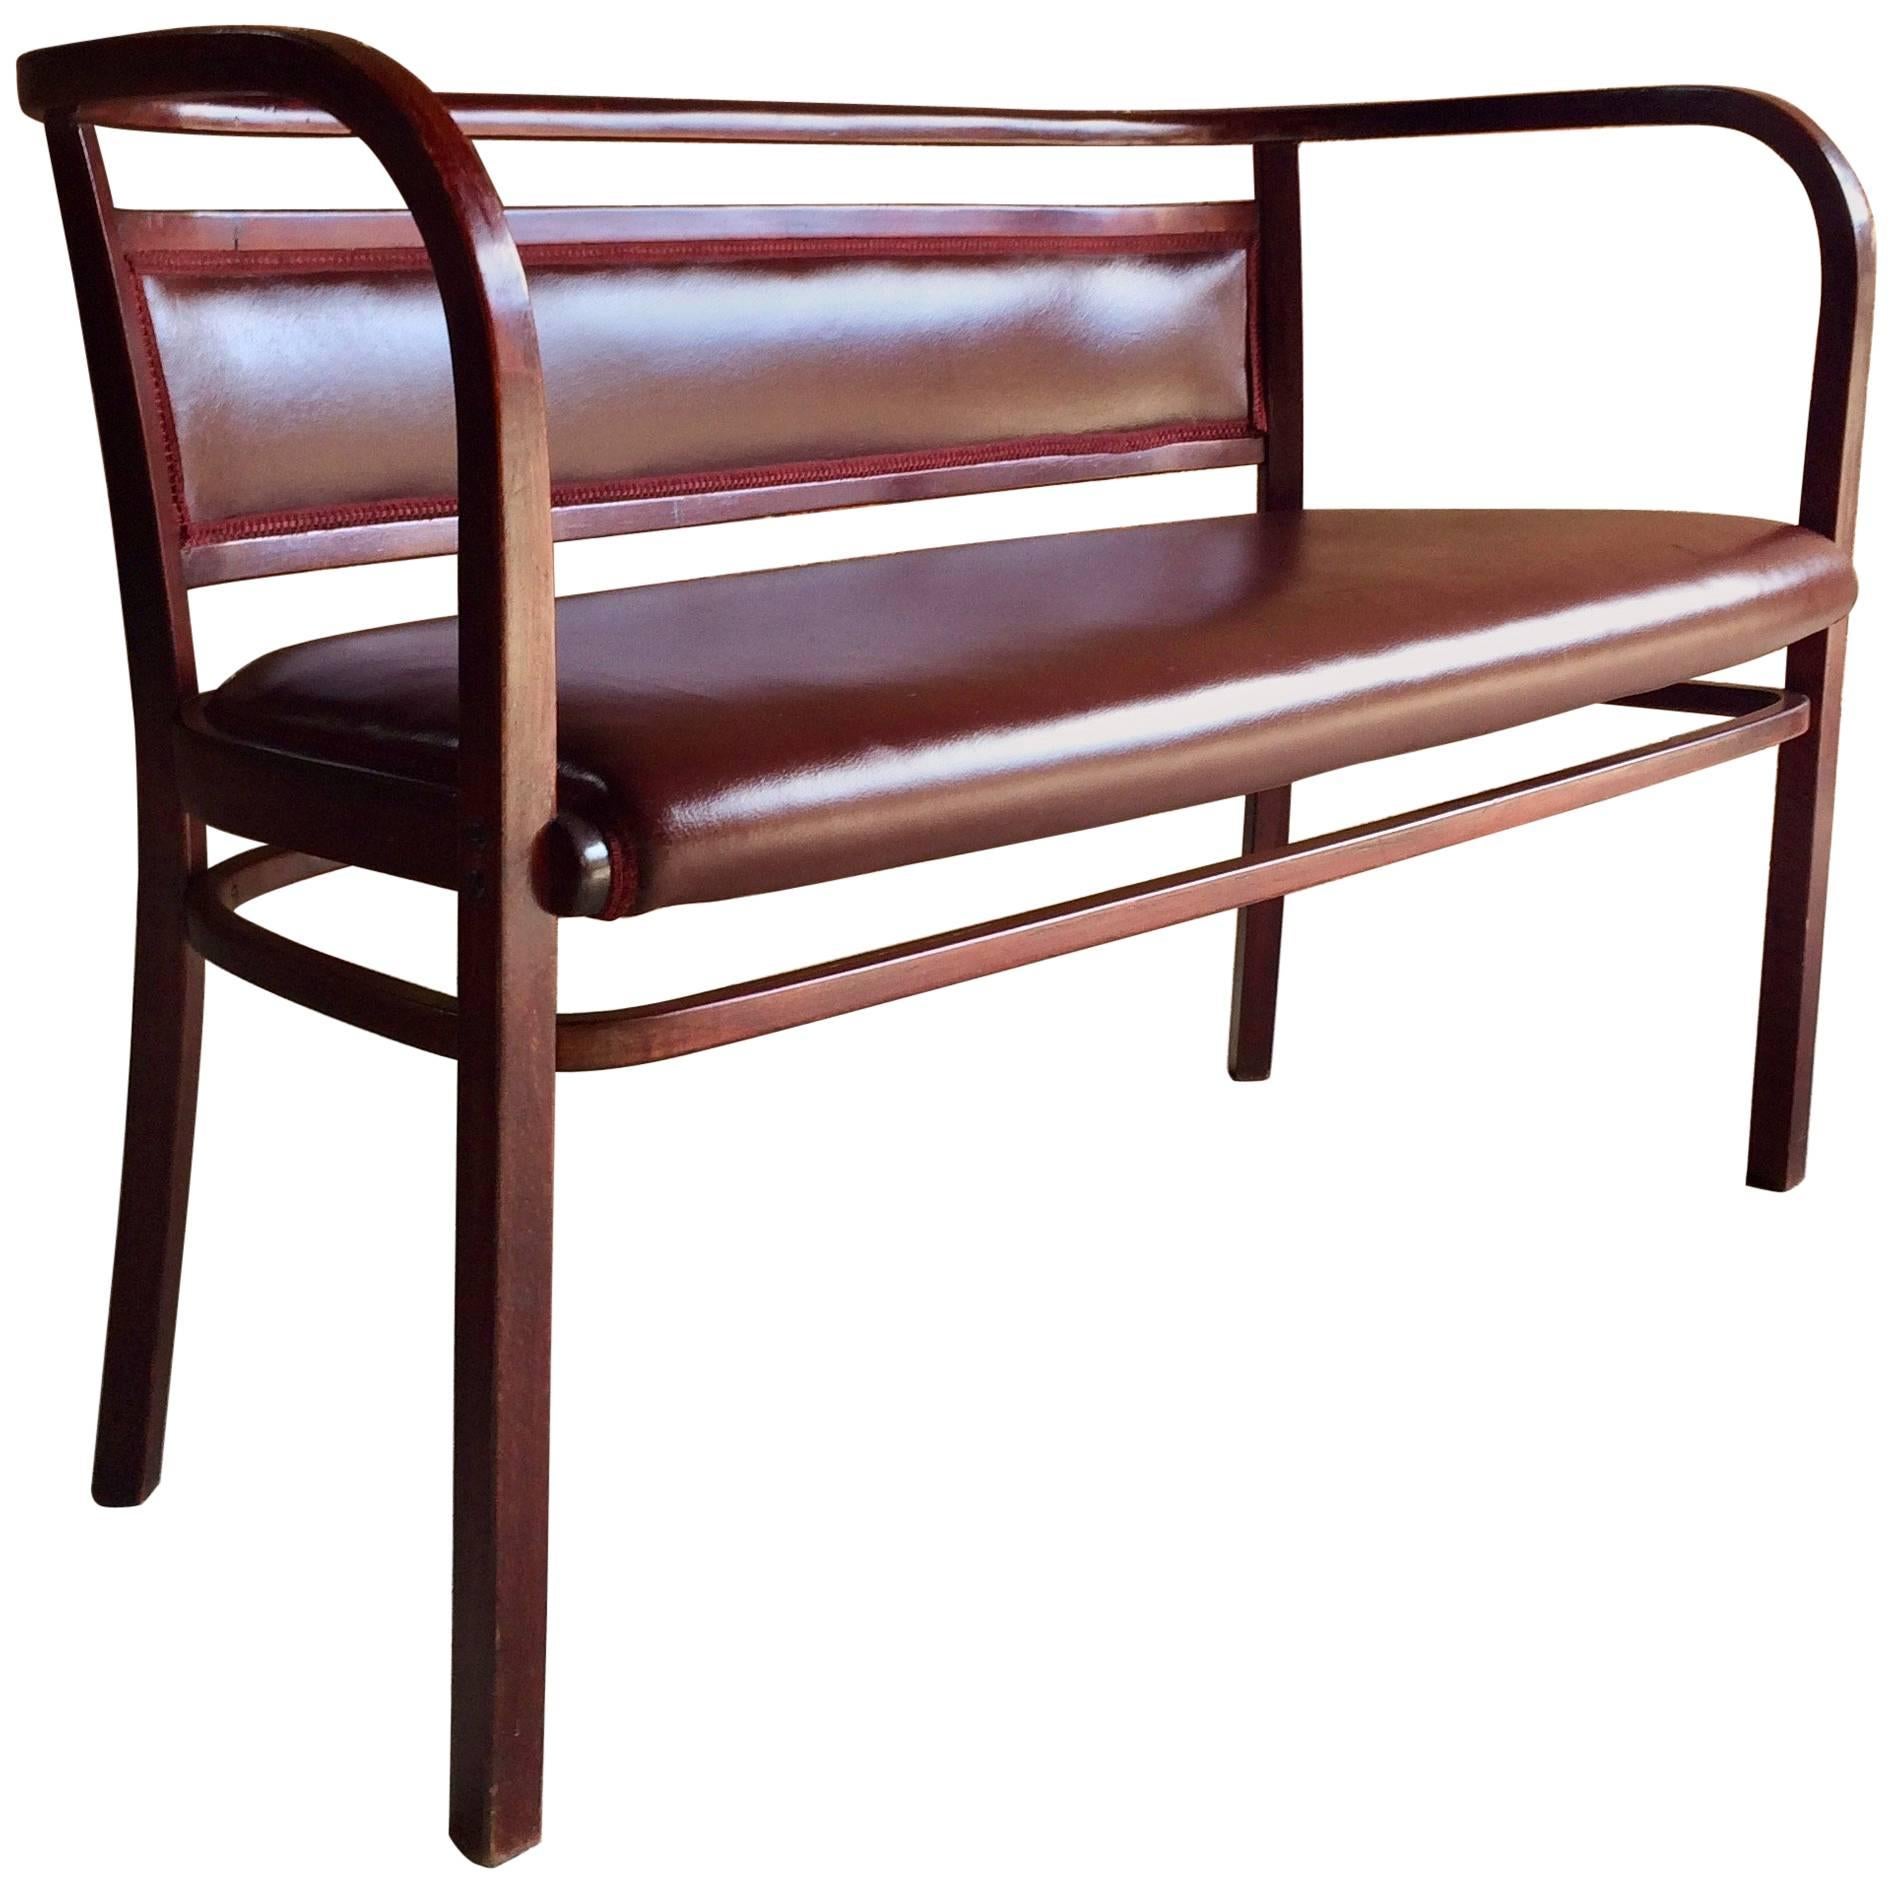 Otto Wagner for Thonet Bentwood Sofa Bench, circa 1908 Model 3